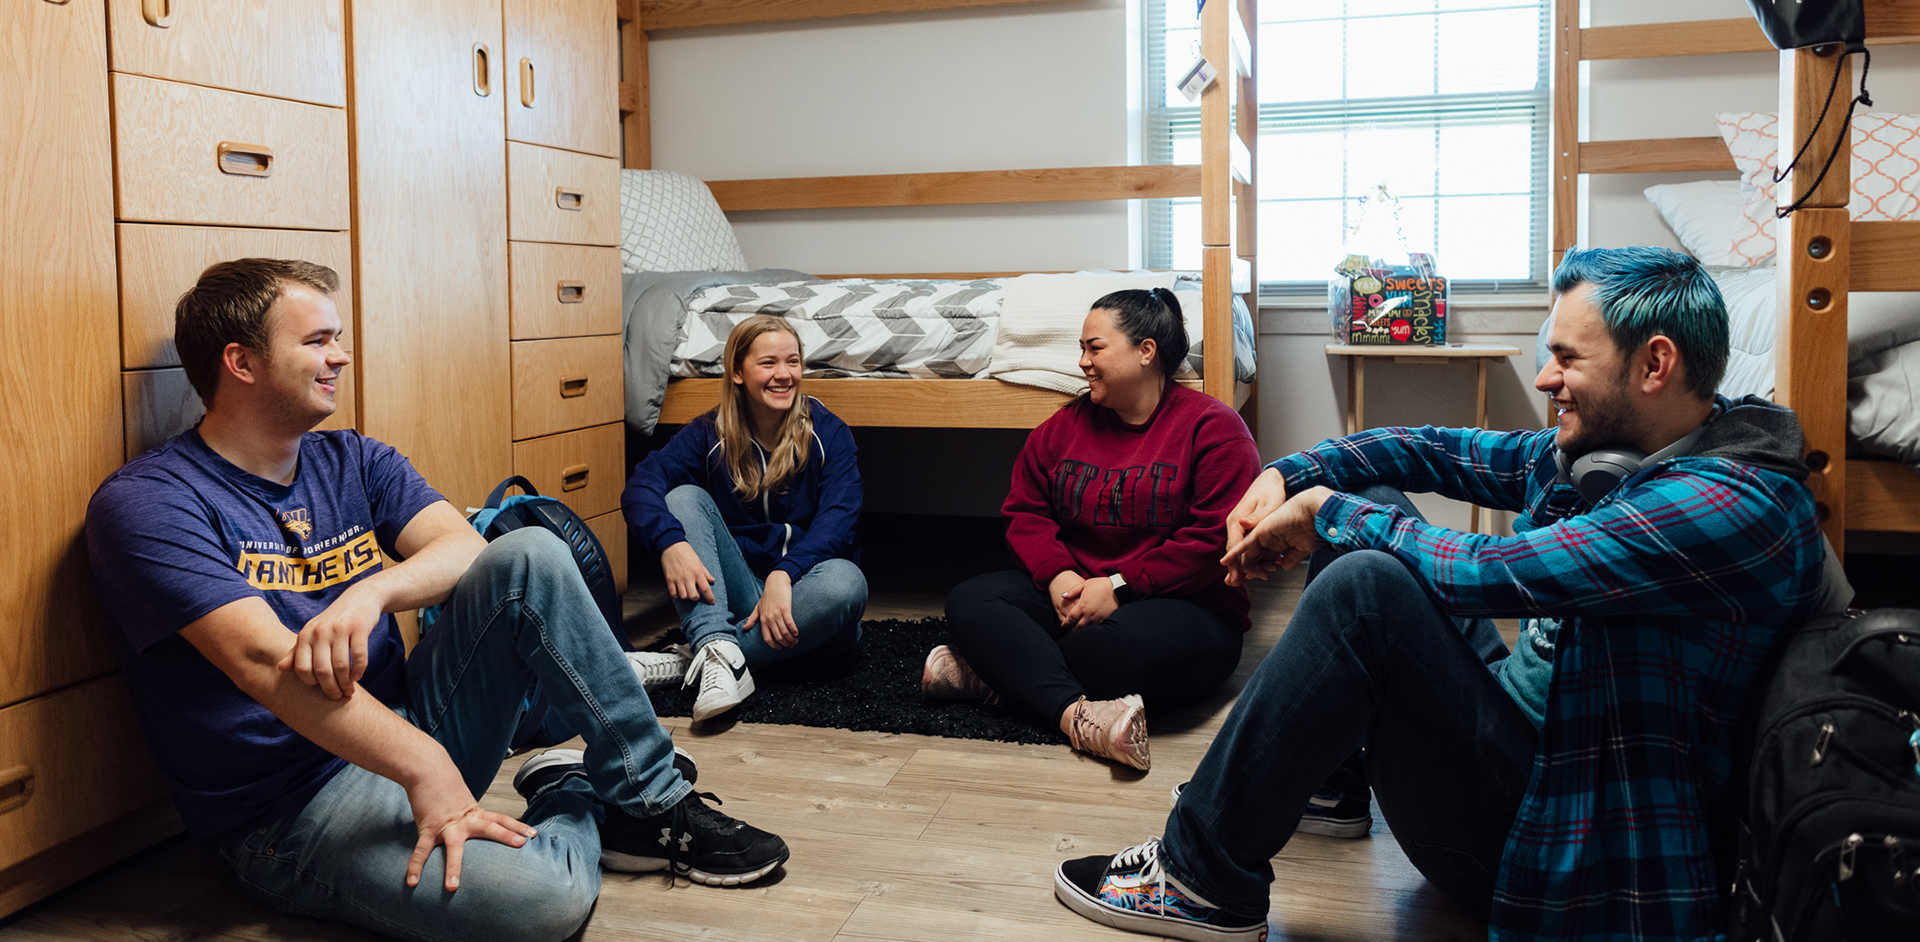 Students gathered in a dorm room